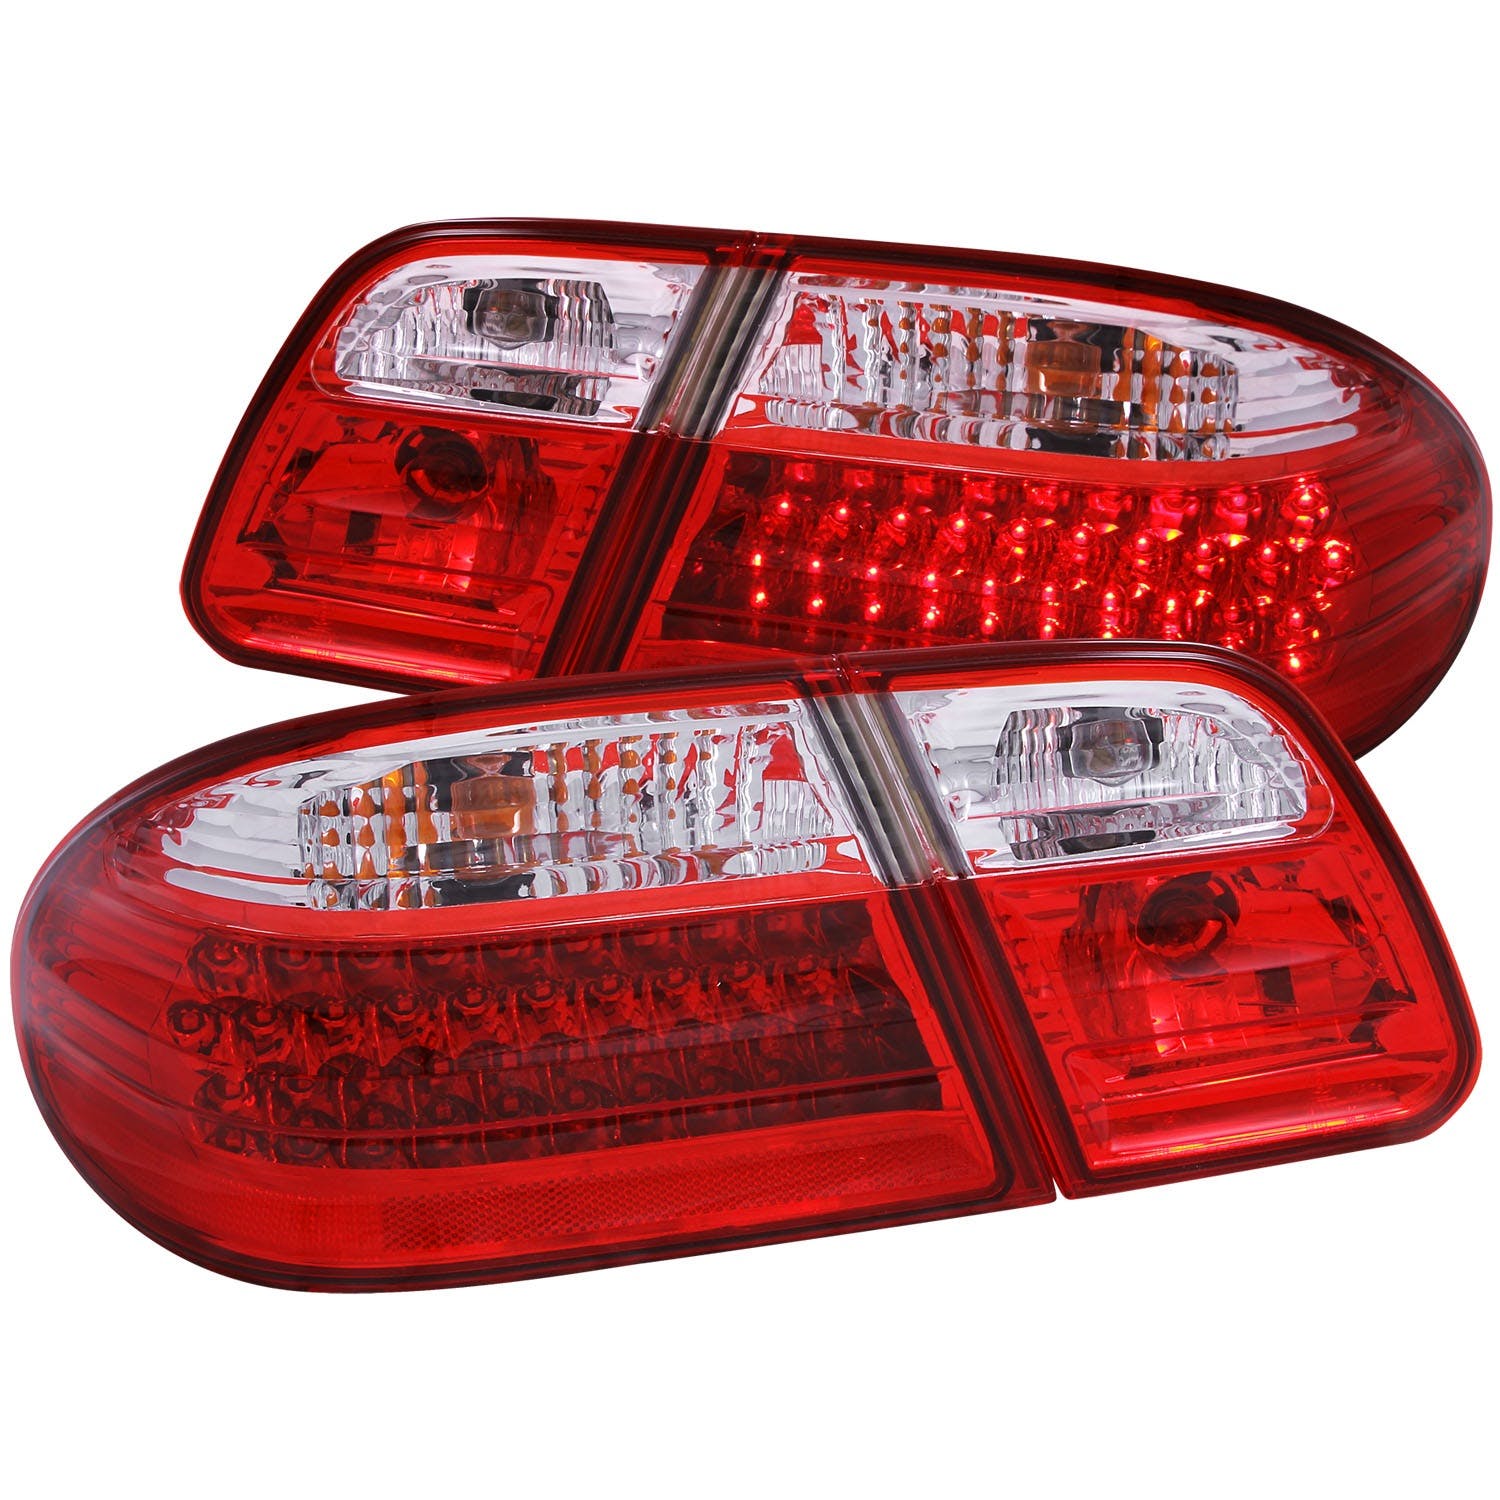 AnzoUSA 321114 LED Taillights Red/Clear